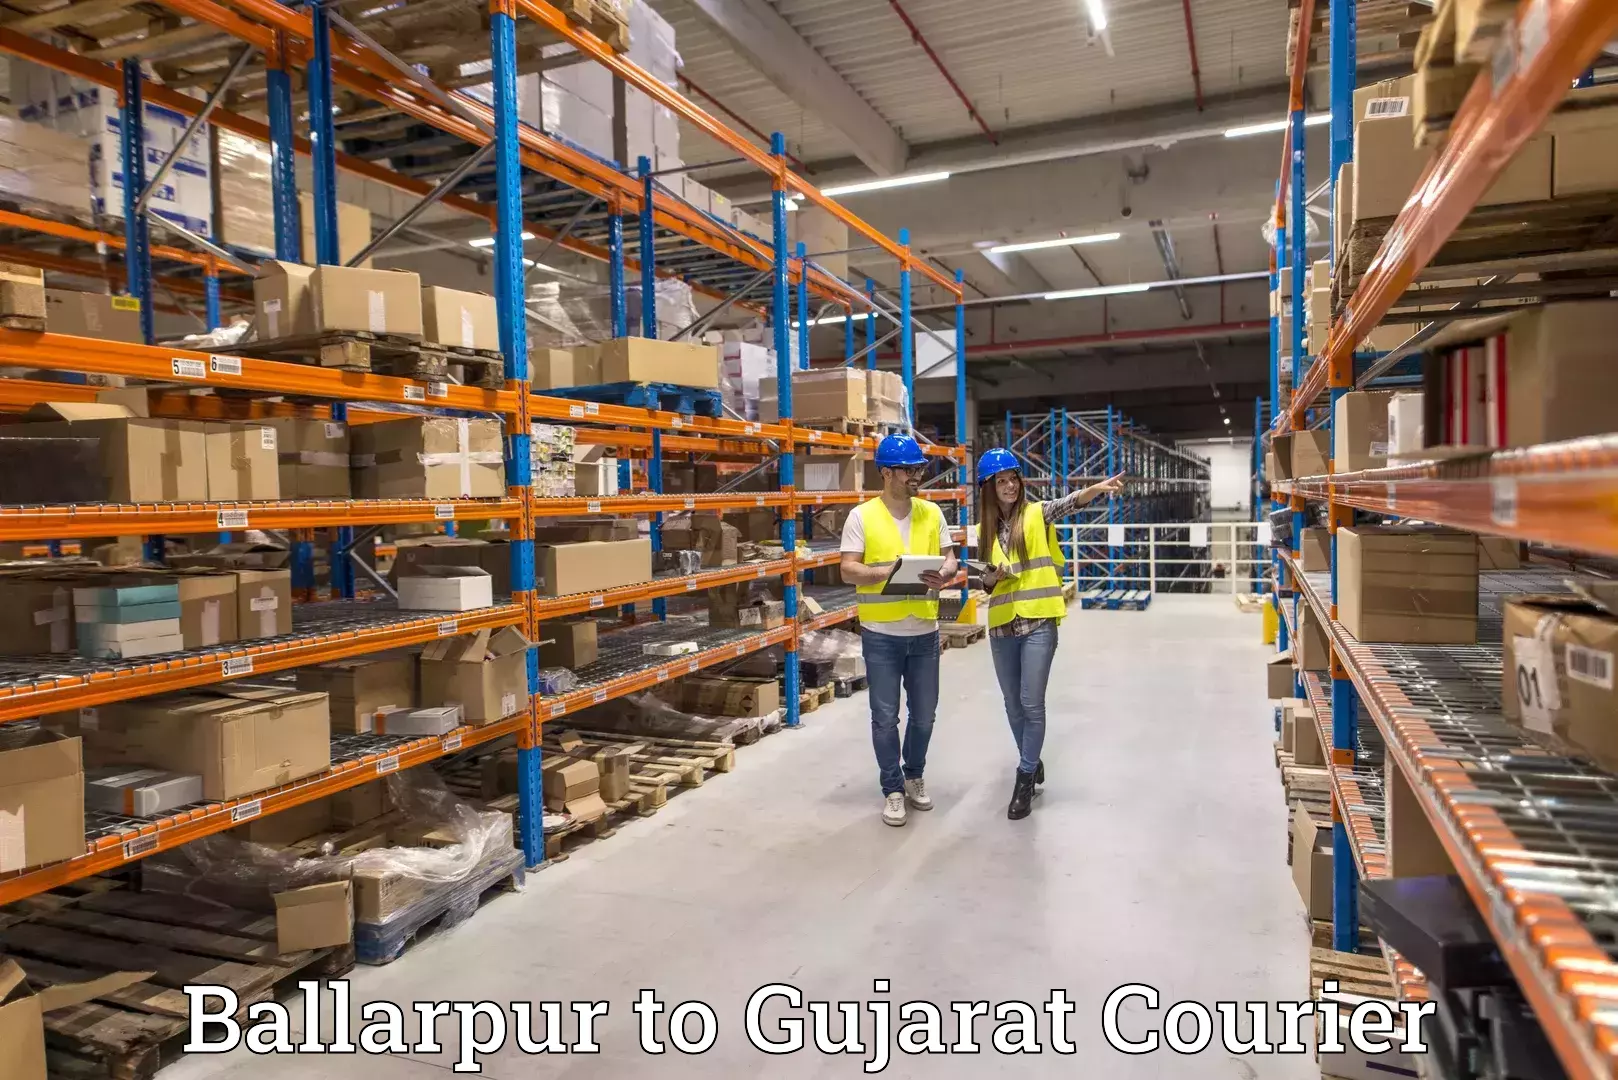 Global courier networks Ballarpur to Ahmedabad